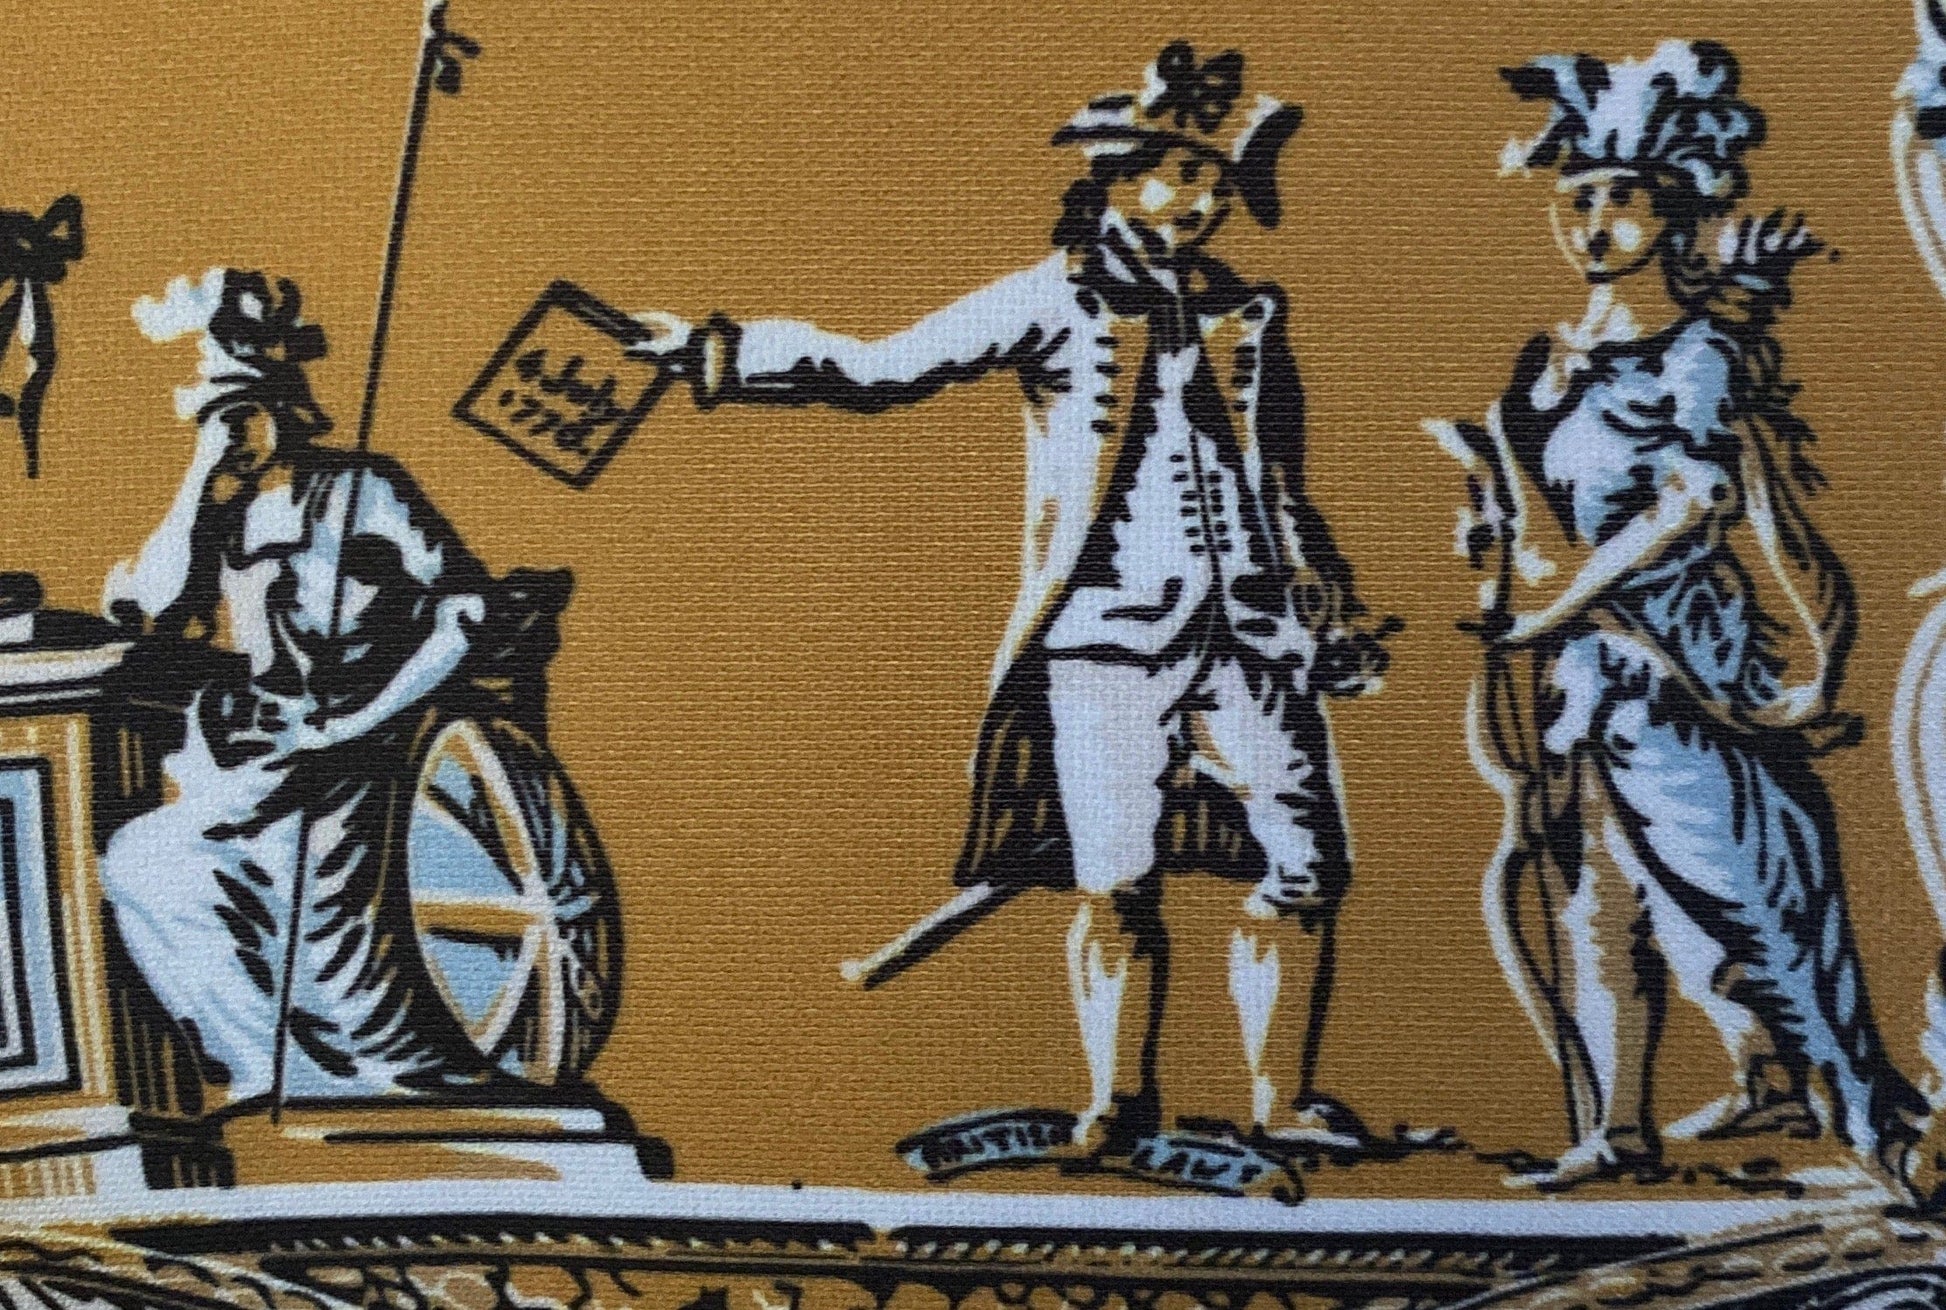 Details from the Revolutionary pillow with historical image celebrating July 4, 1776 from The History List store